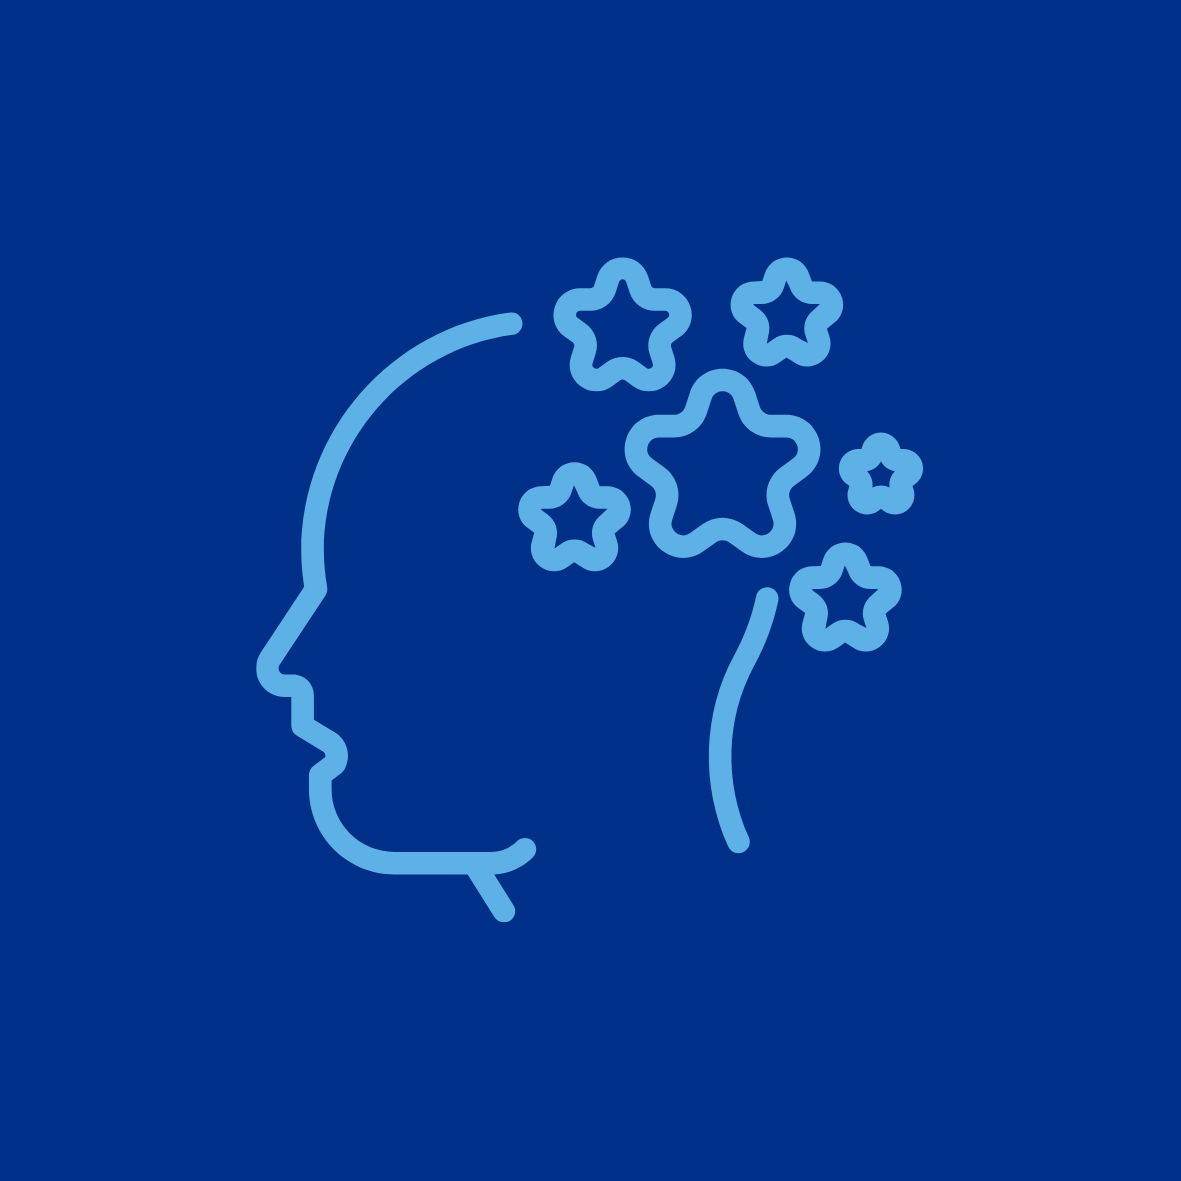 Image of Head and Stars to Depict Learning Difficulty